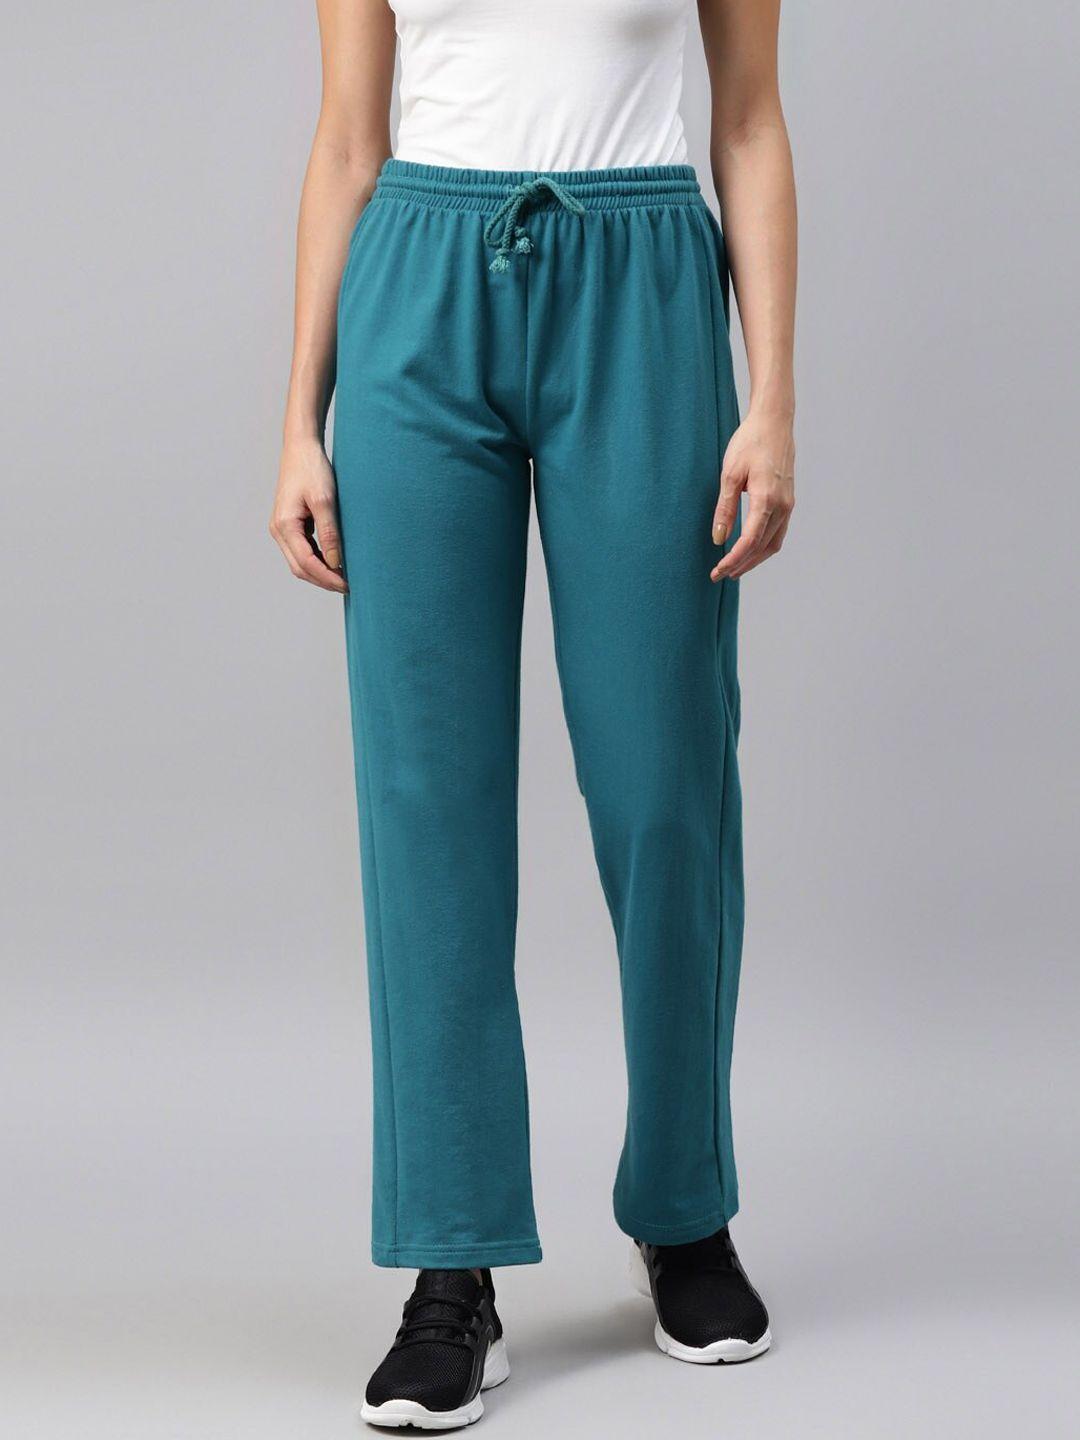 laabha-women-turquoise-blue-solid-track-pant